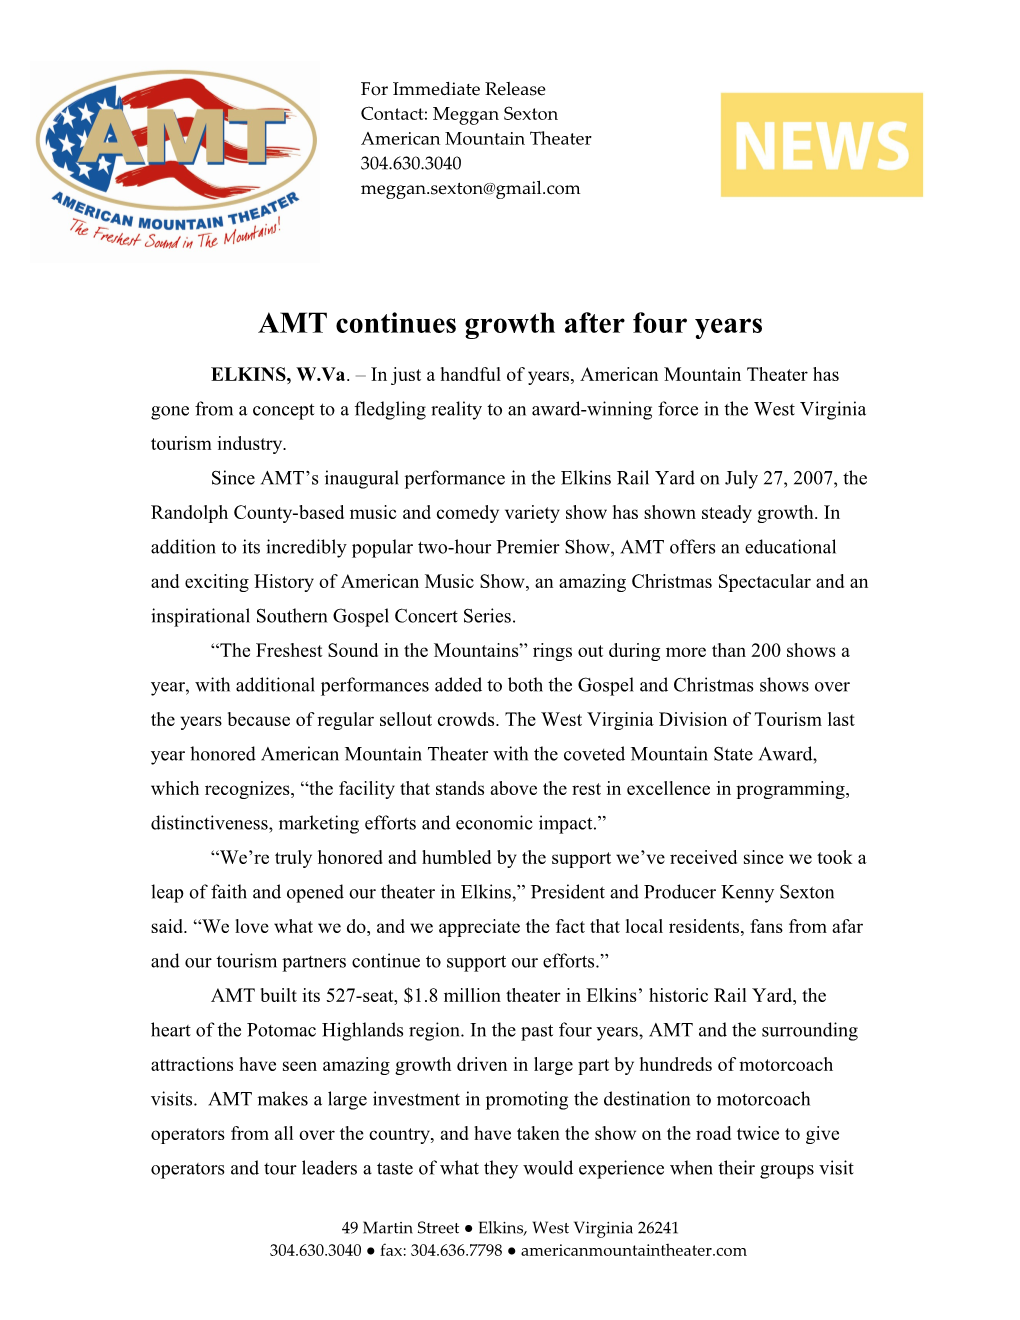 AMT Continues Growth After Four Years